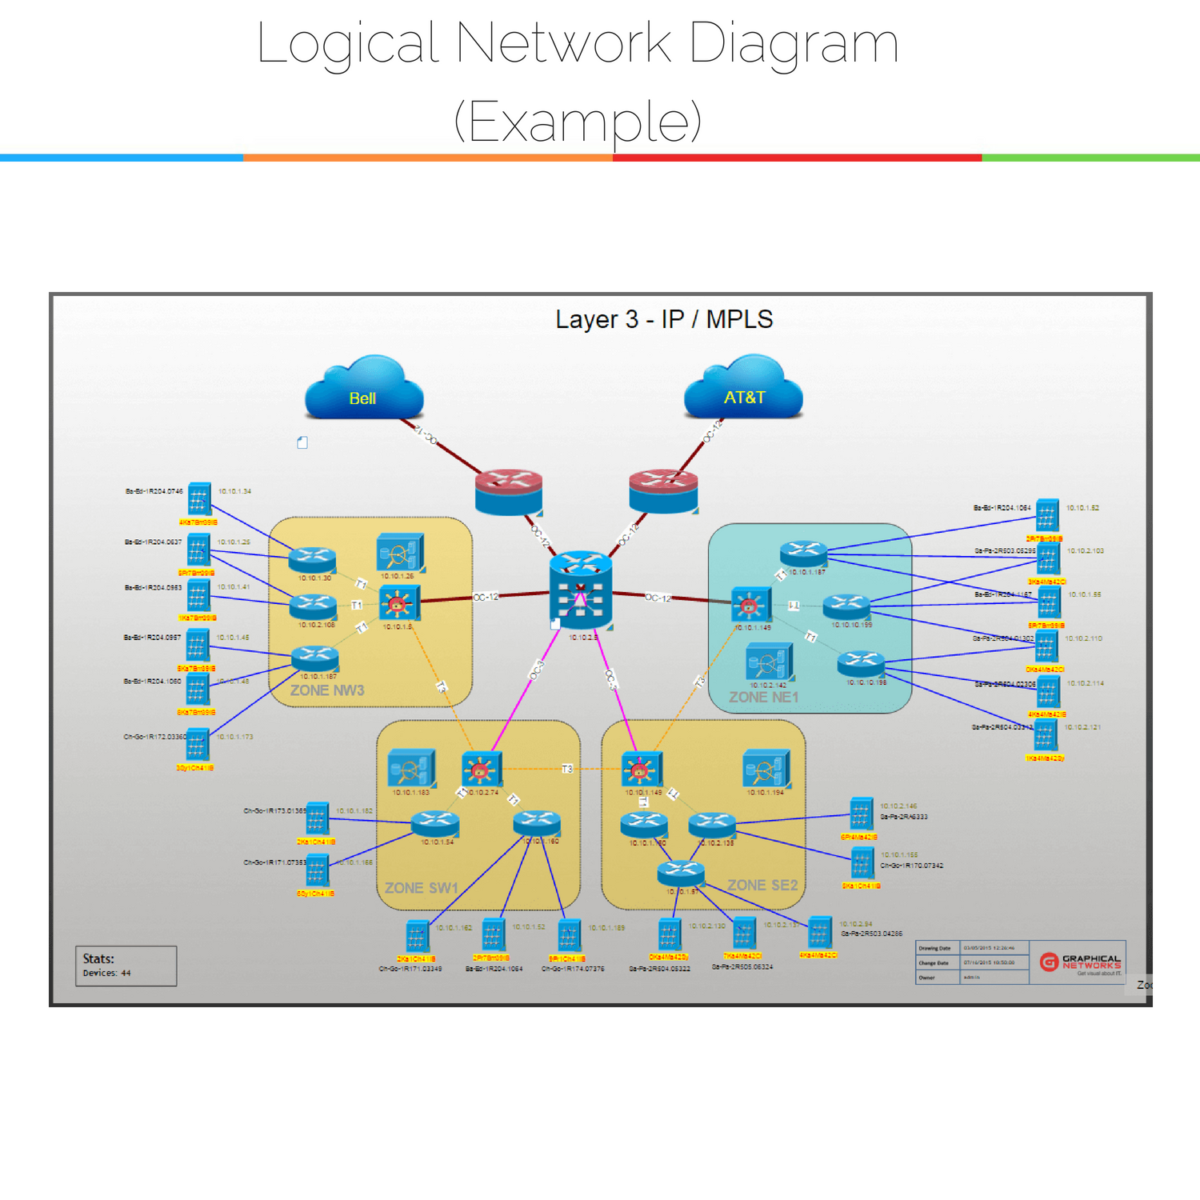 Physical Network Diagrams Explained | DCIM, Network ... 2wire switch diagram examples 